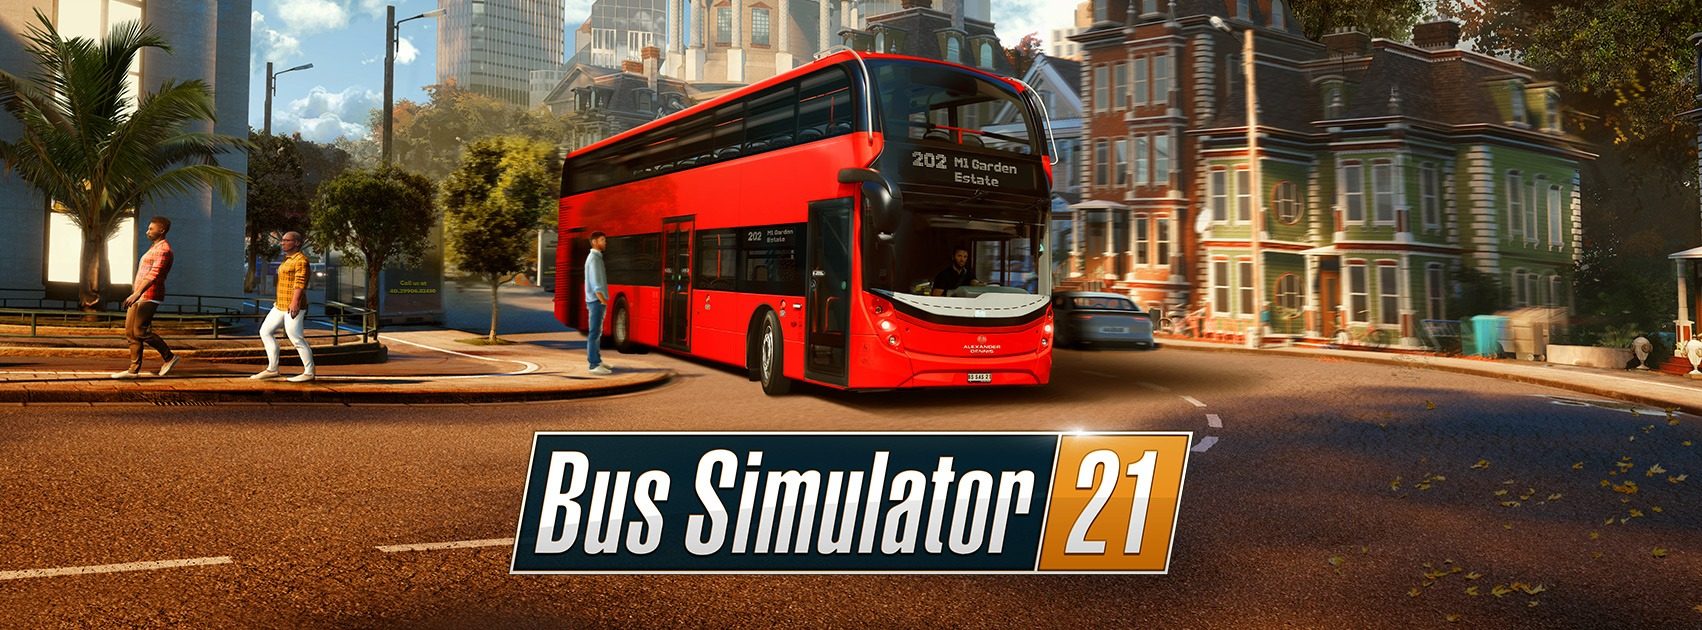 free bus simulator games for pc